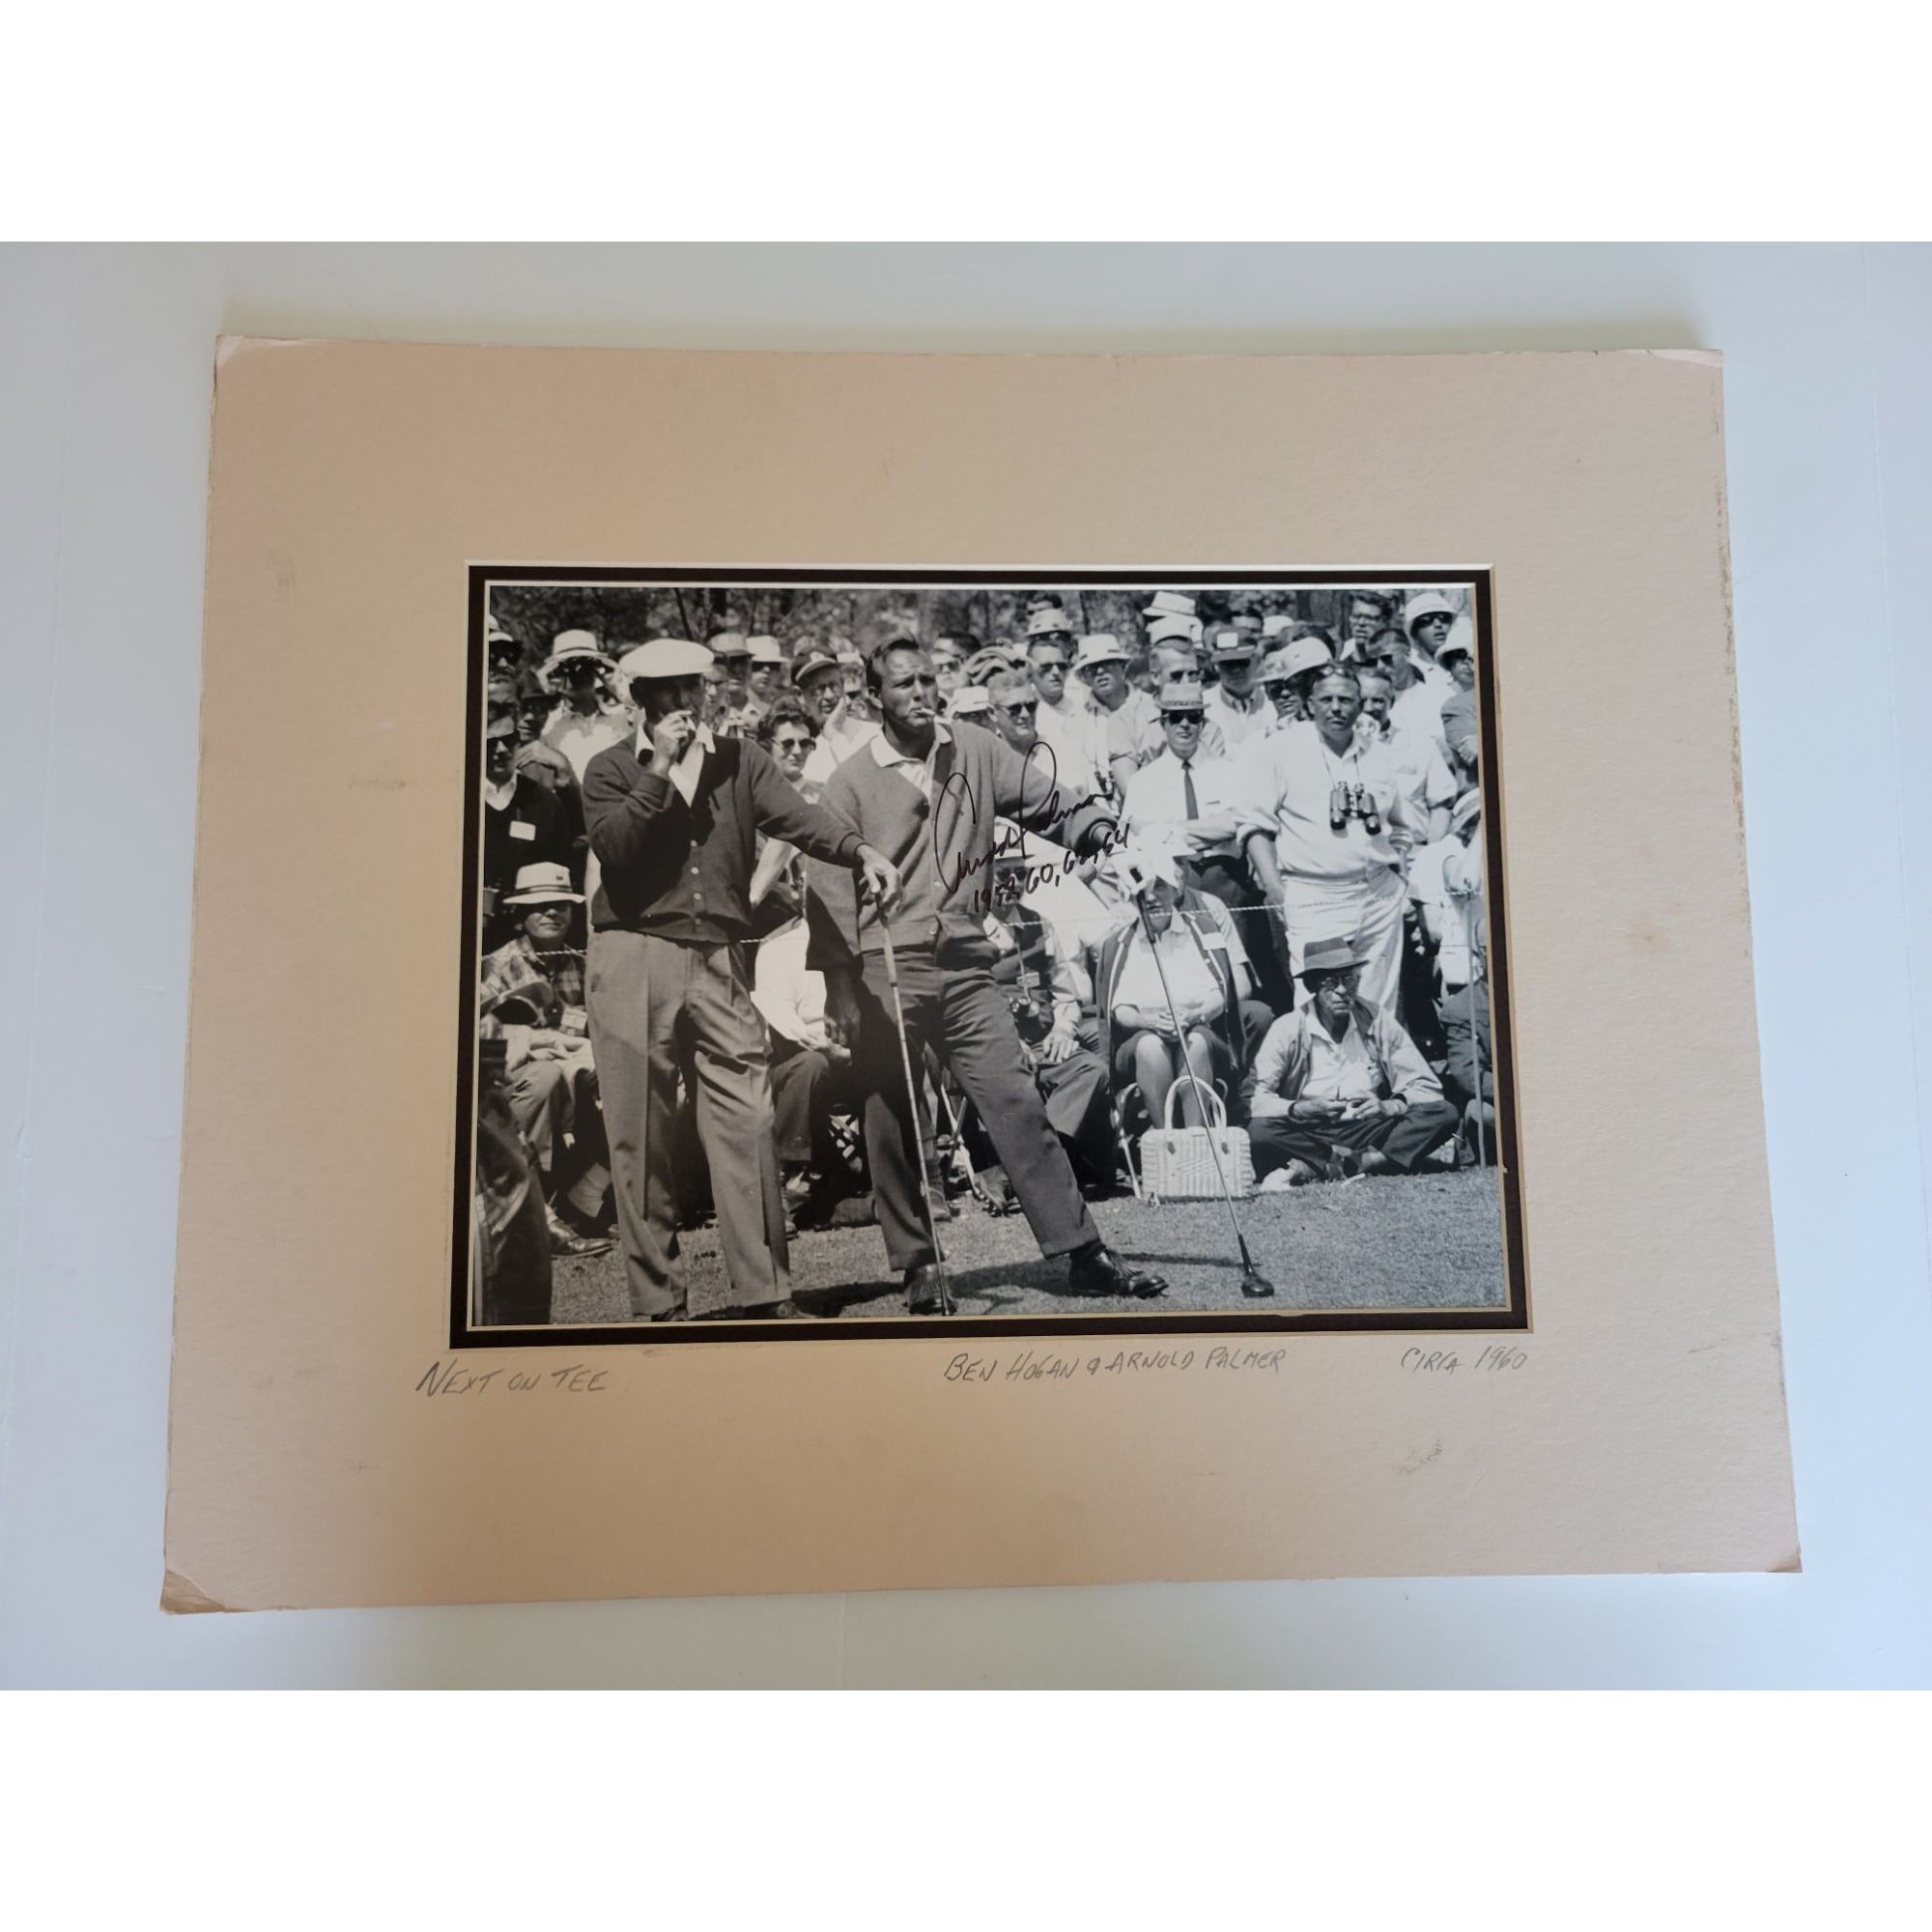 Arnold Palmer matted 11 by 14 photo with Ben Hogan